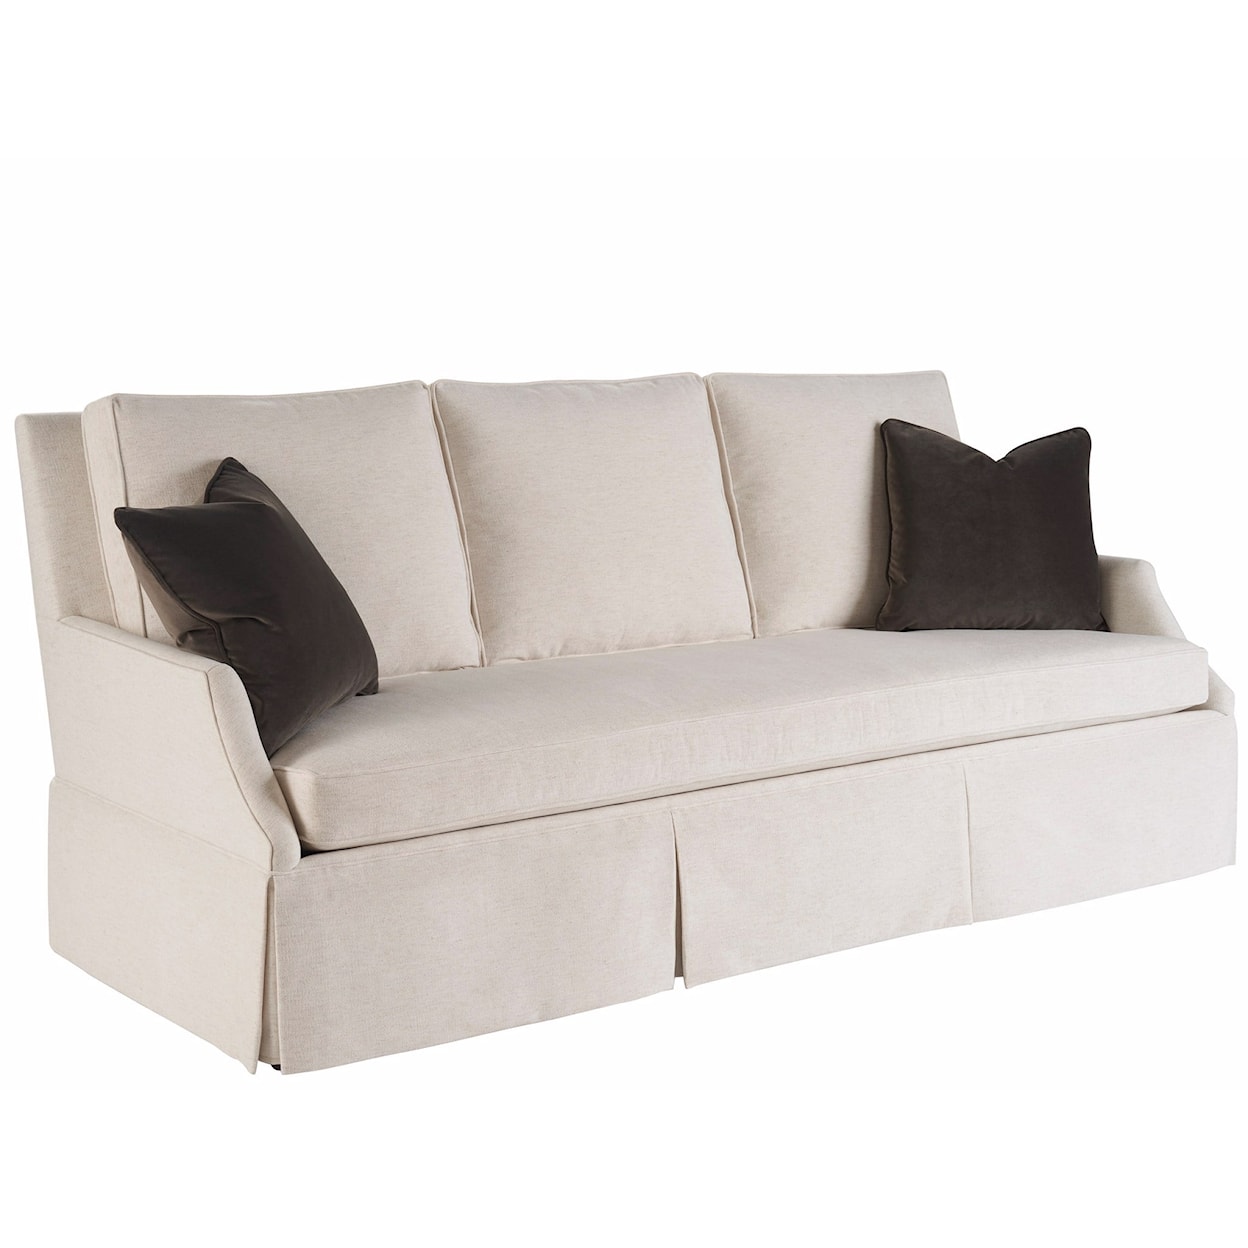 Universal Special Order Jacqueline Skirted Sofa